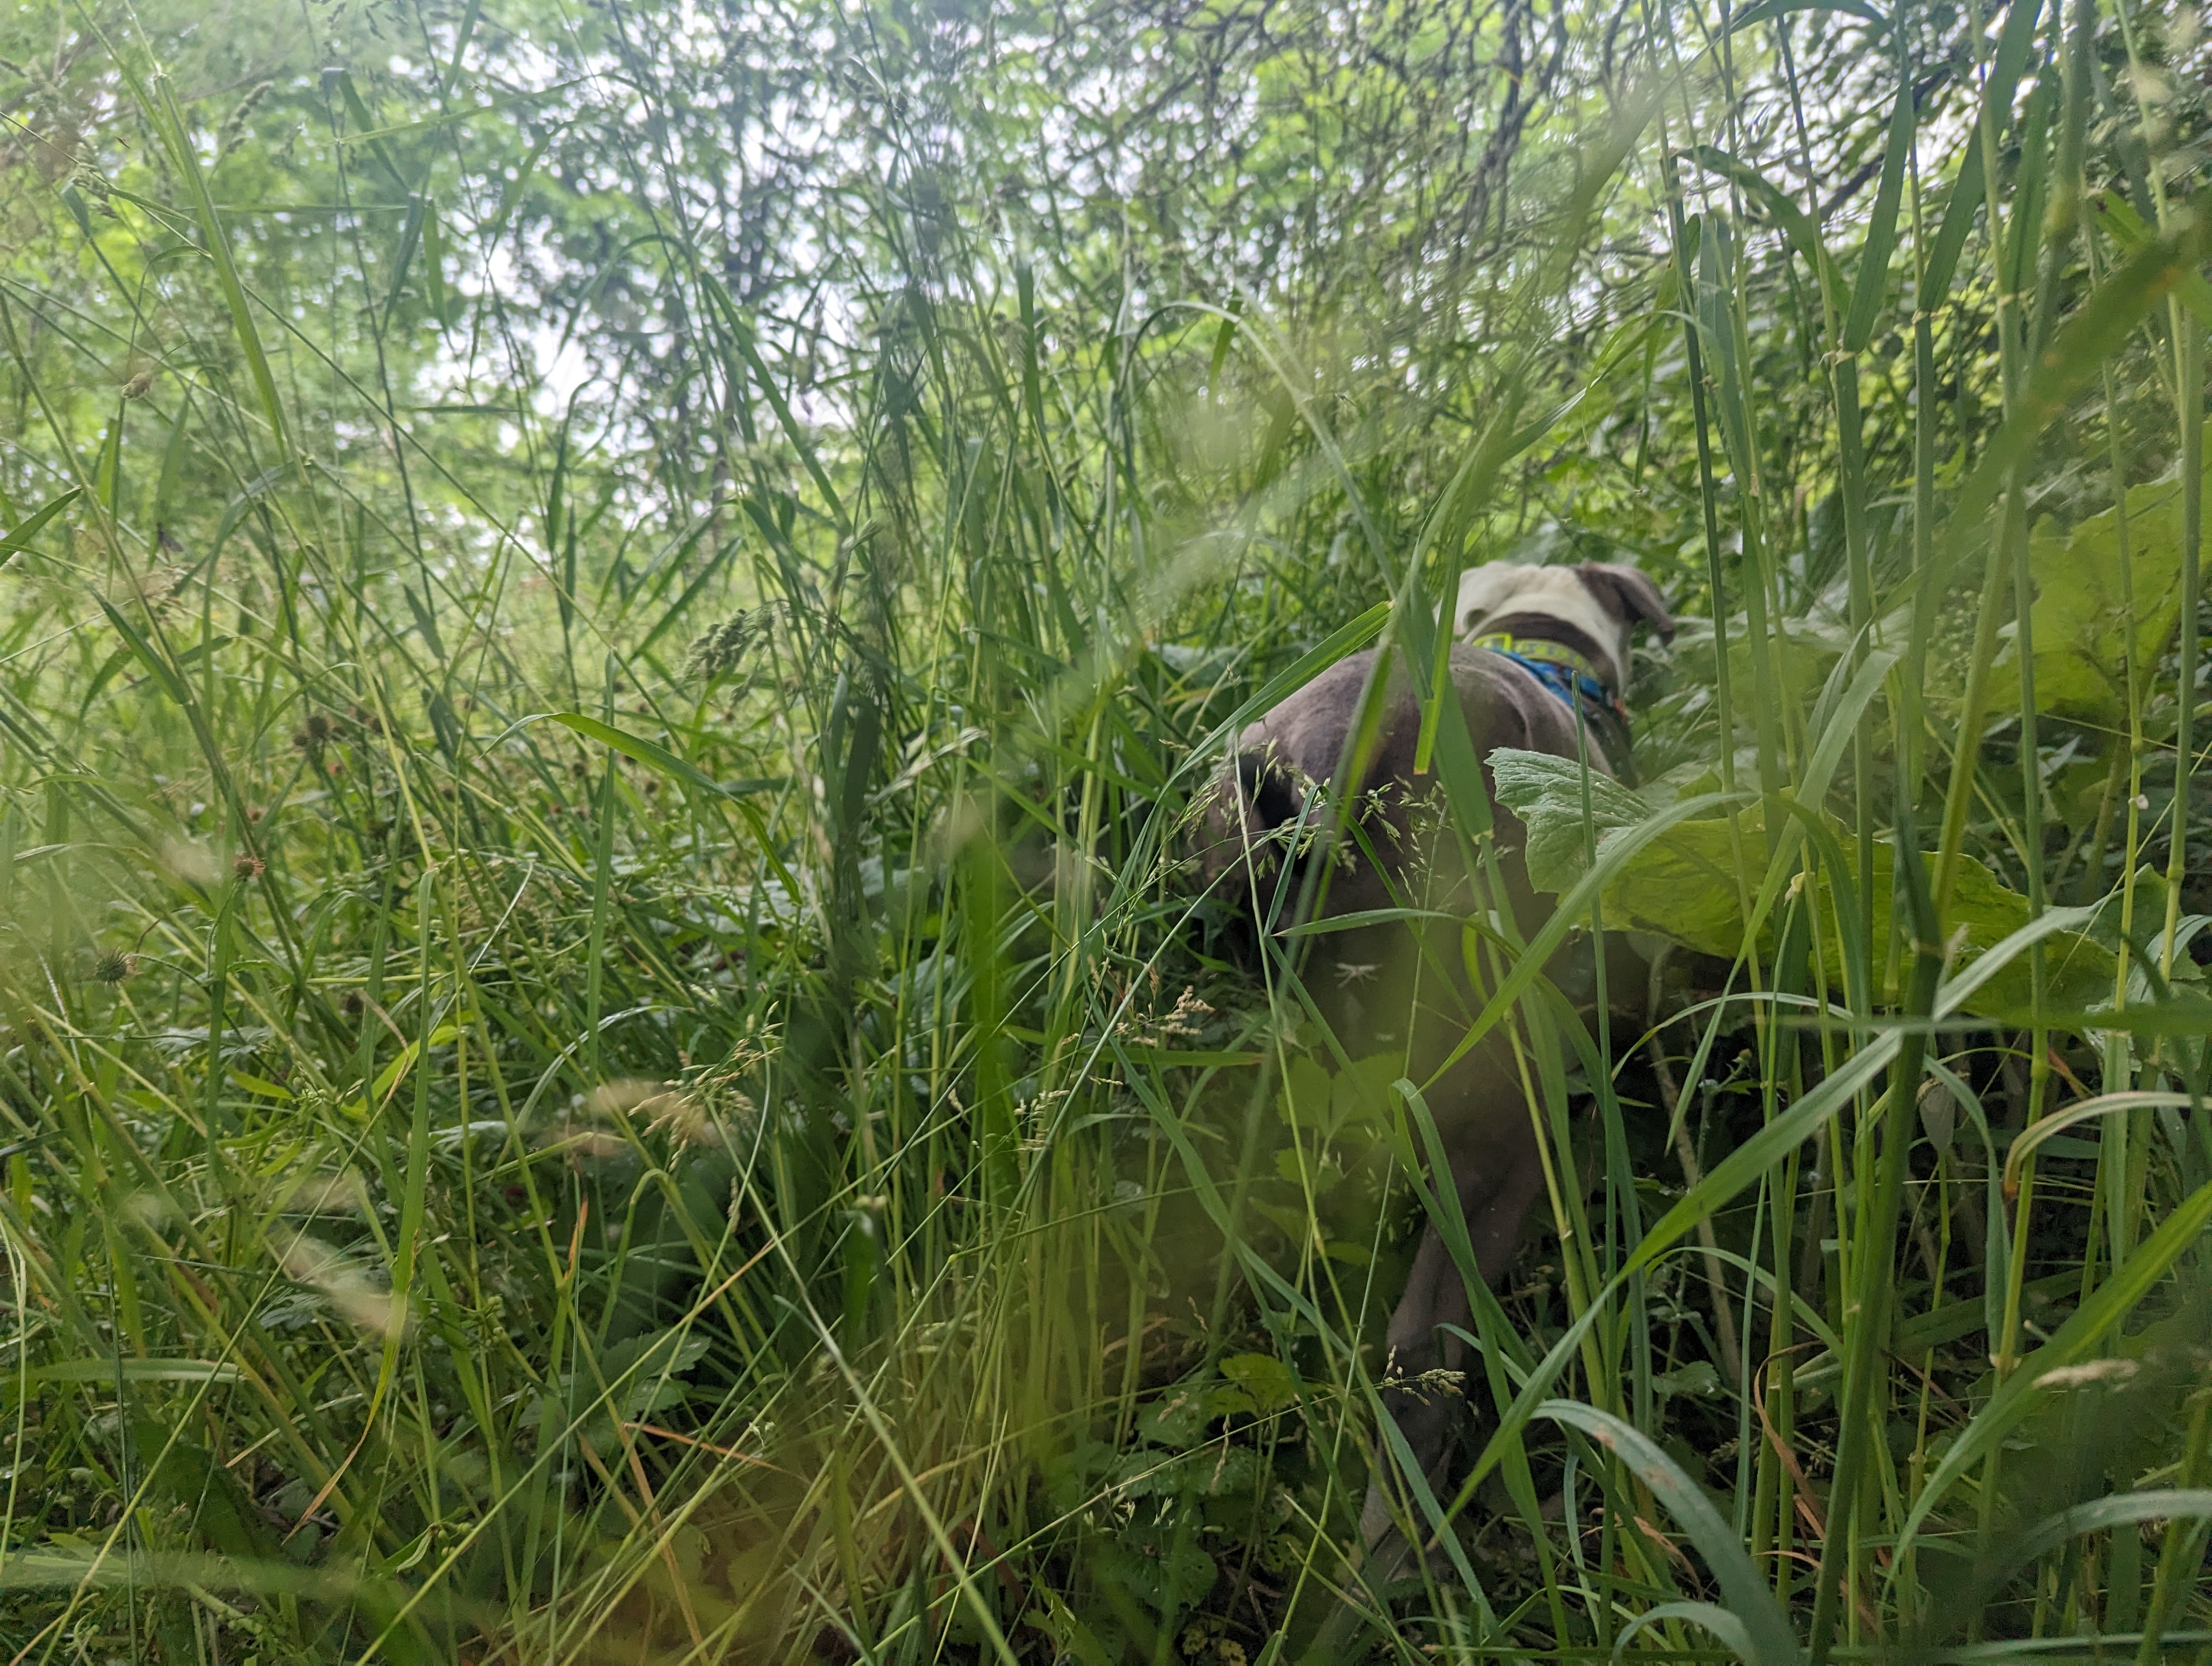 A photo of Star, a white and gray pitbull, standing in tall grass with her back to the camera.